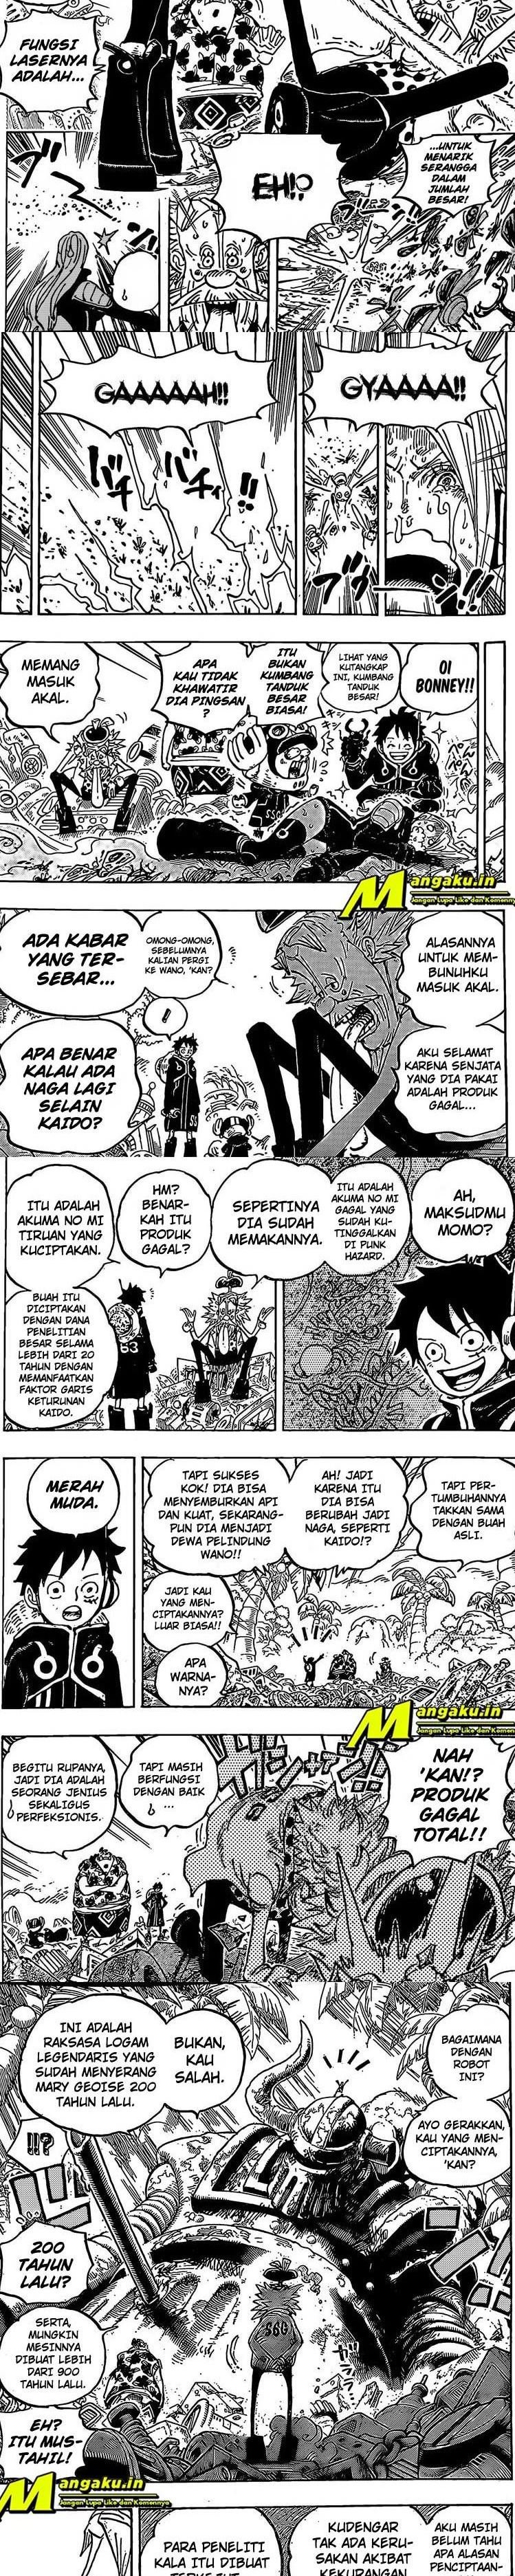 One Piece Chapter 1067 Hq - 35